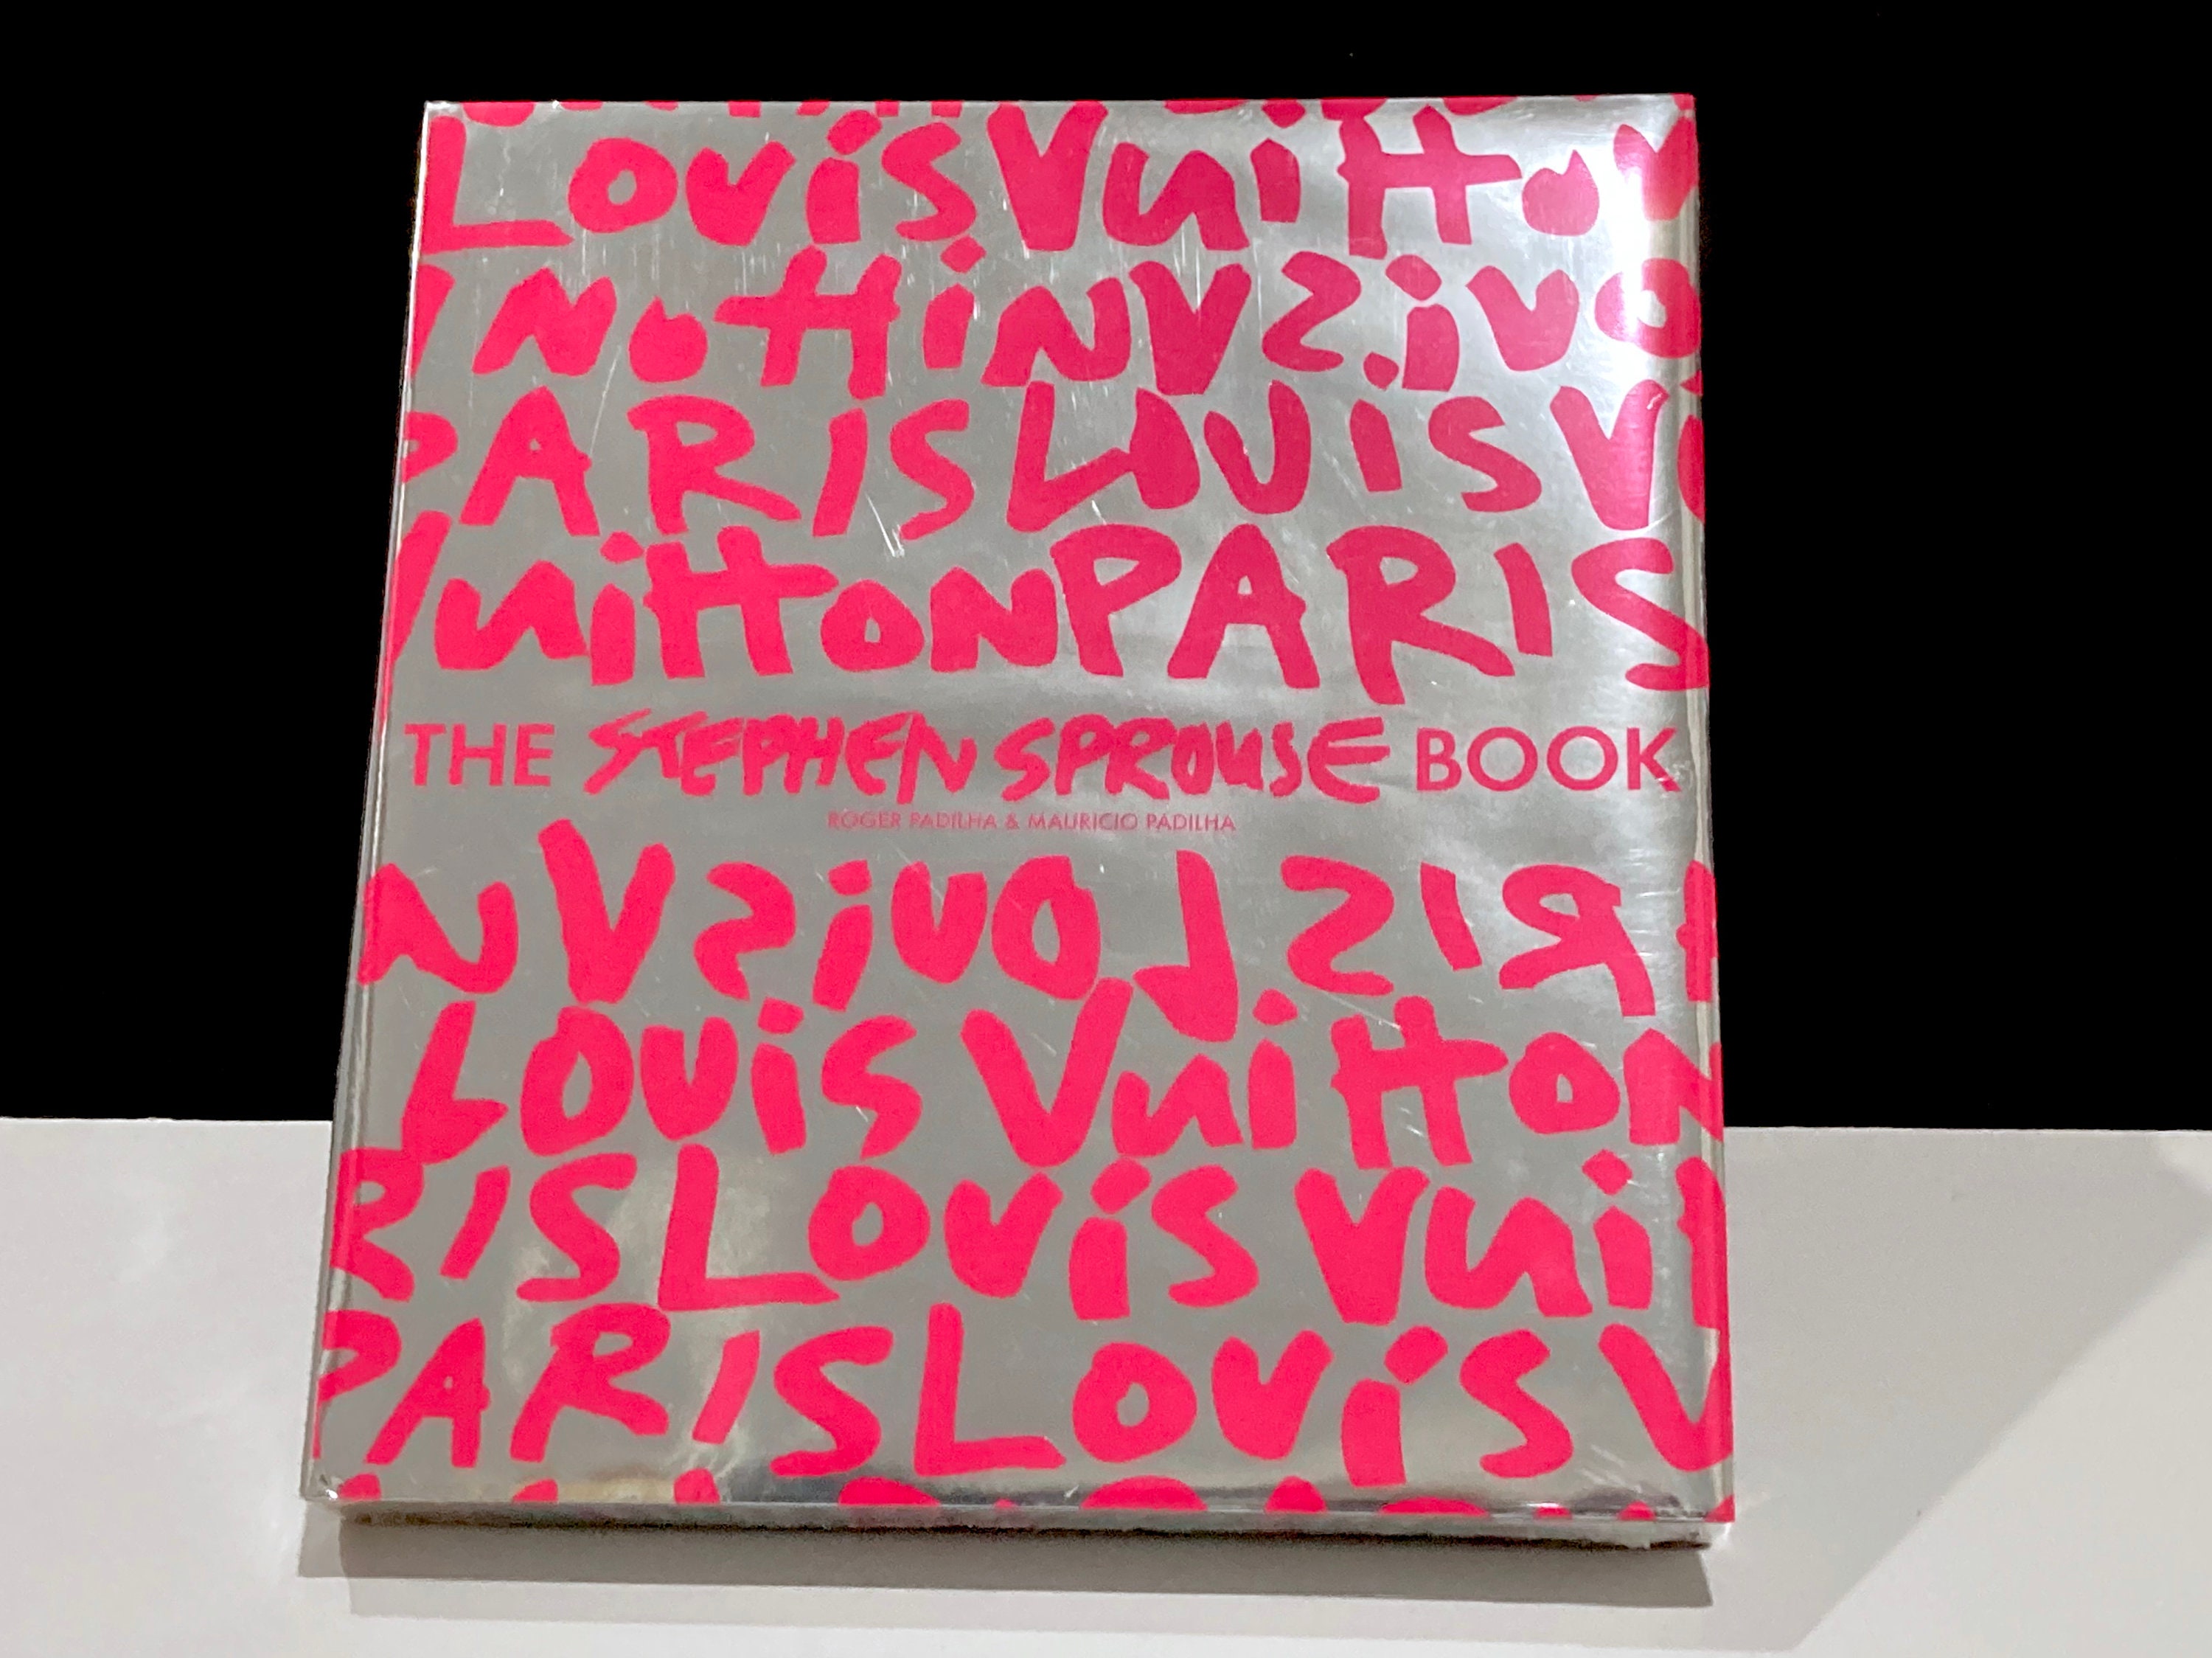 Stephen Sprouse remembered @ Deitch, by Louis Vuitton, Debbie